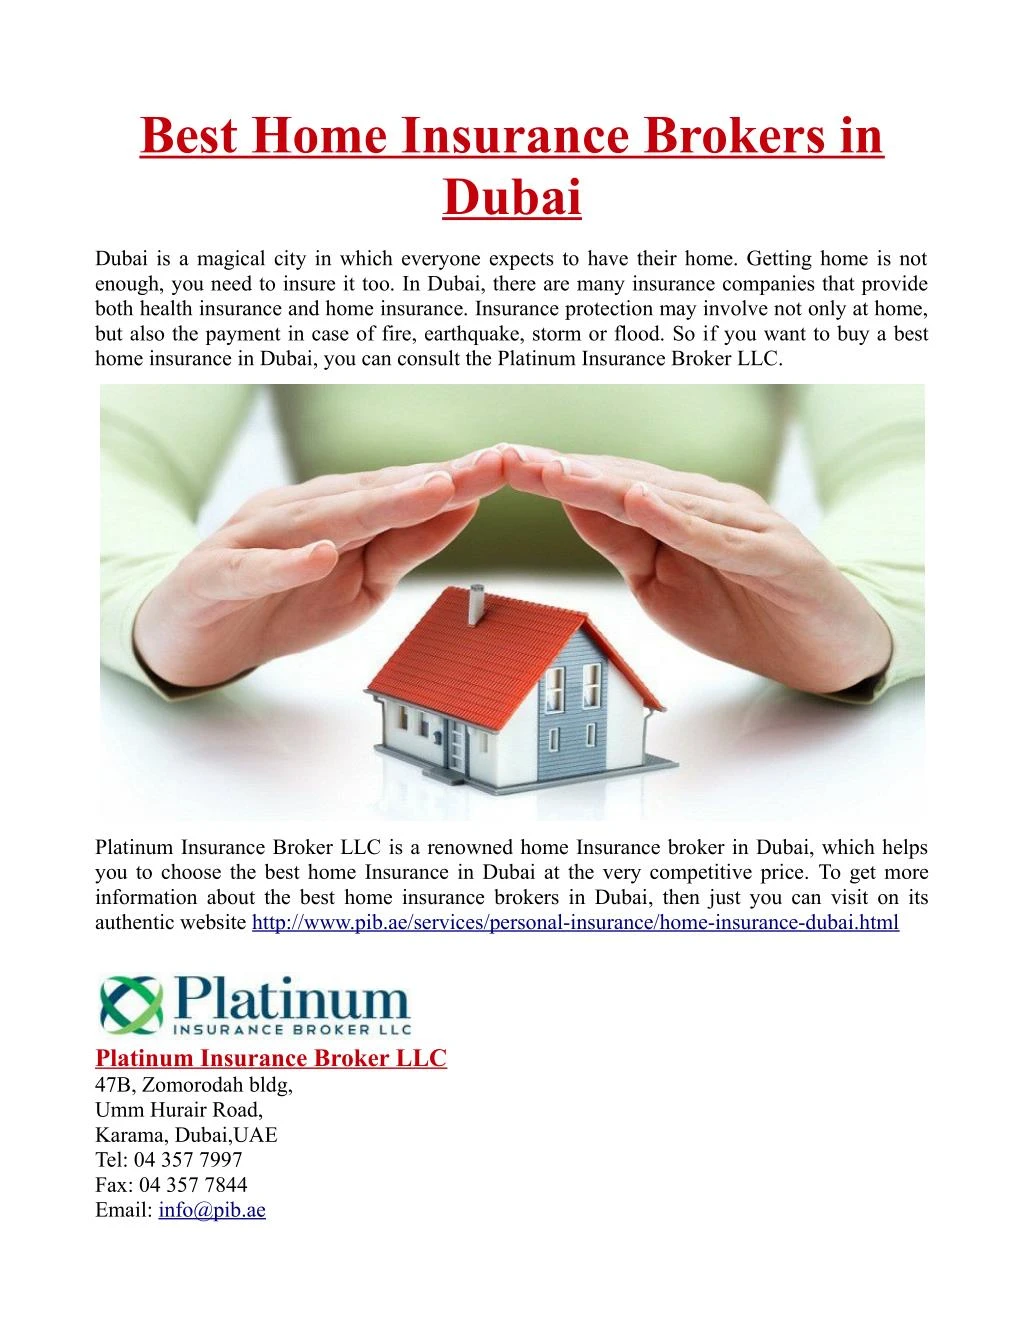 PPT - Best Home Insurance Brokers in Dubai PowerPoint ...